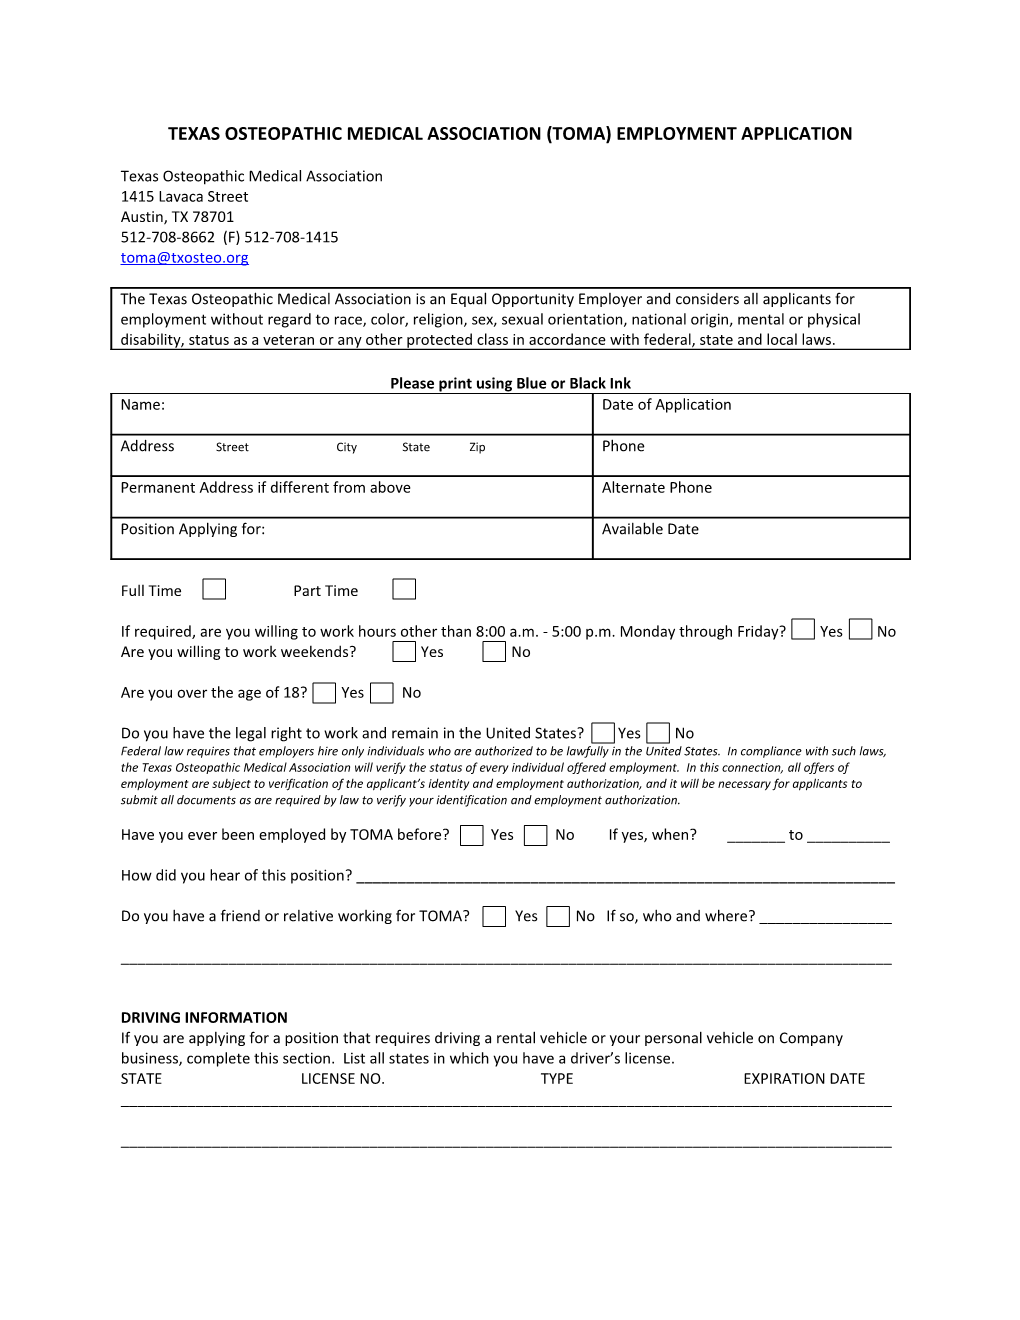 Texas Osteopathic Medical Association (Toma) Employment Application